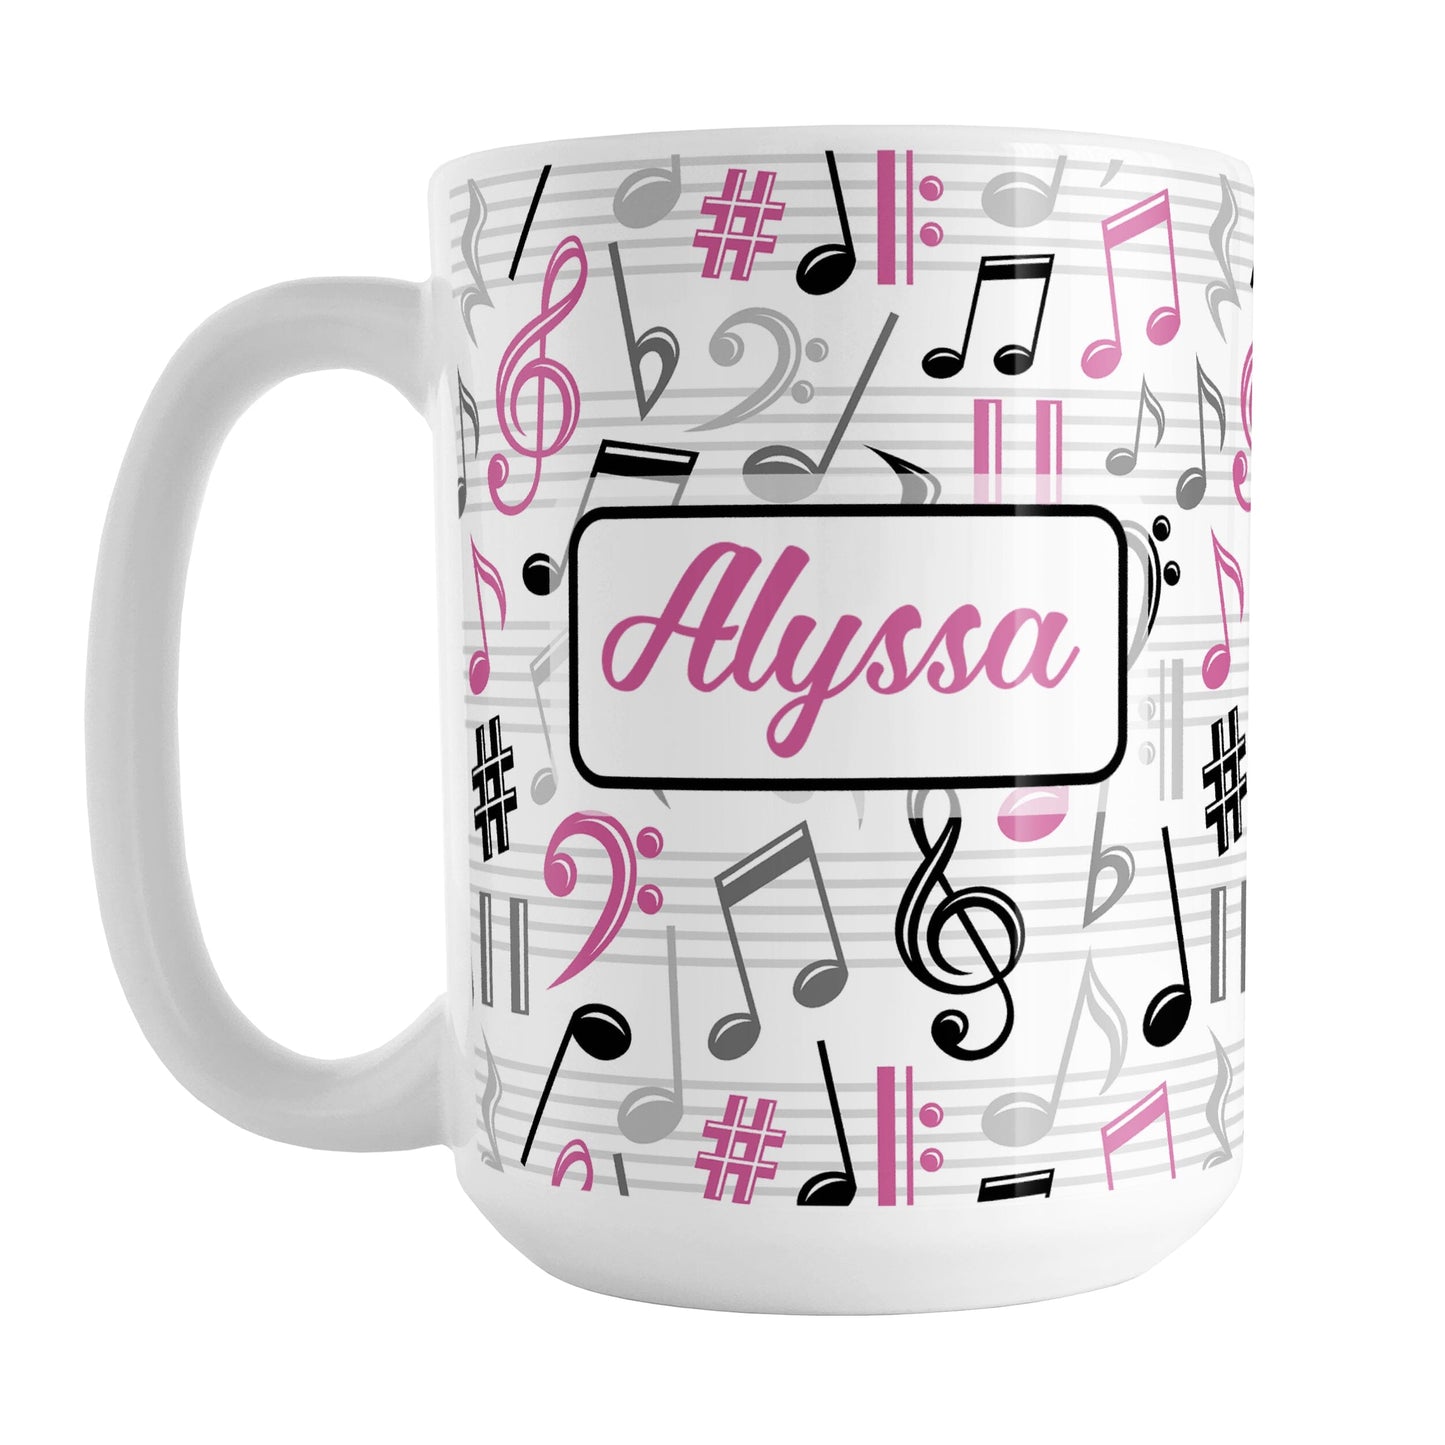 Personalized Pink Music Notes Pattern Mug (15oz) at Amy's Coffee Mugs. A ceramic coffee mug designed with music notes and symbols in pink, black, and gray in a pattern that wraps around the mug to the handle. Your personalized name is custom printed in a pink script font on white over the music pattern design on both sides of the mug. 